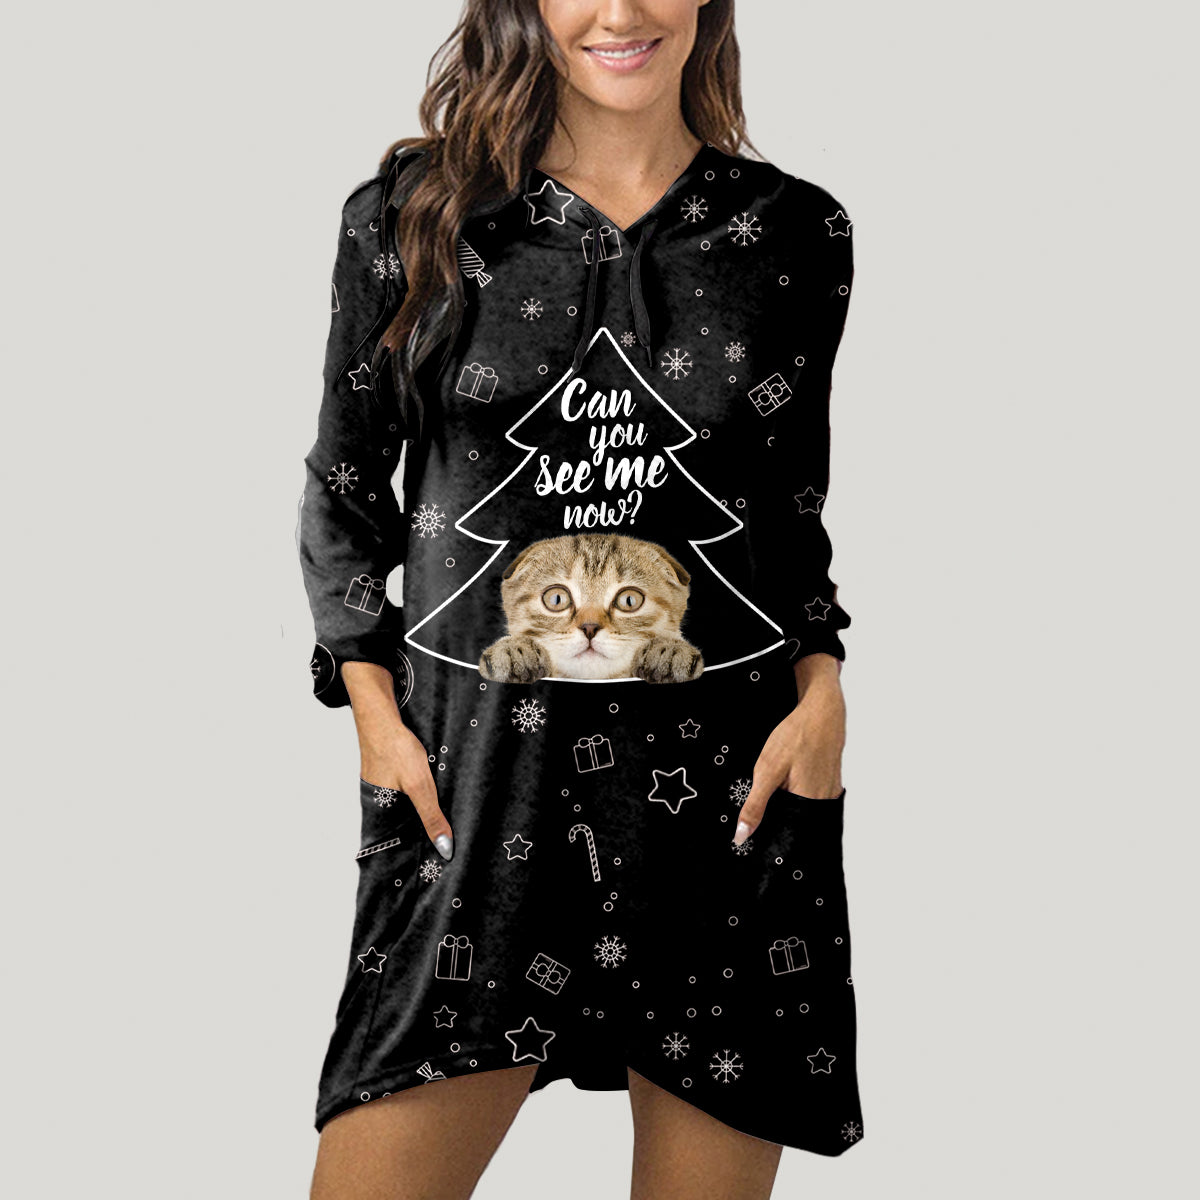 Cute Scottish Fold Cat - Hoodie With Ears V1